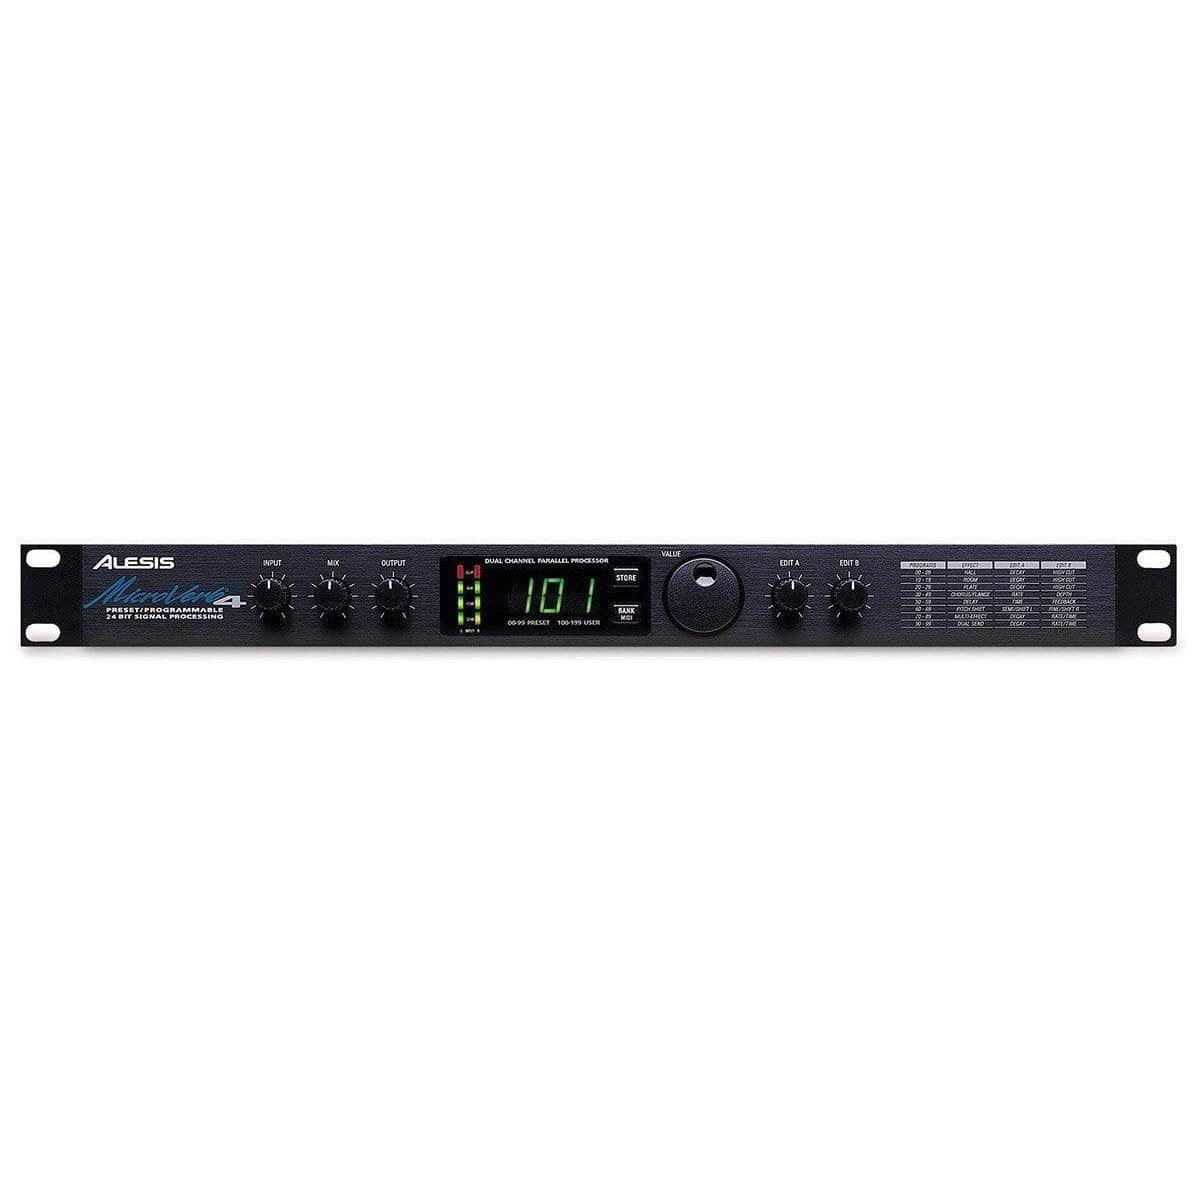 Alesis MicroVerb 4 DSP & Dynamic Processors